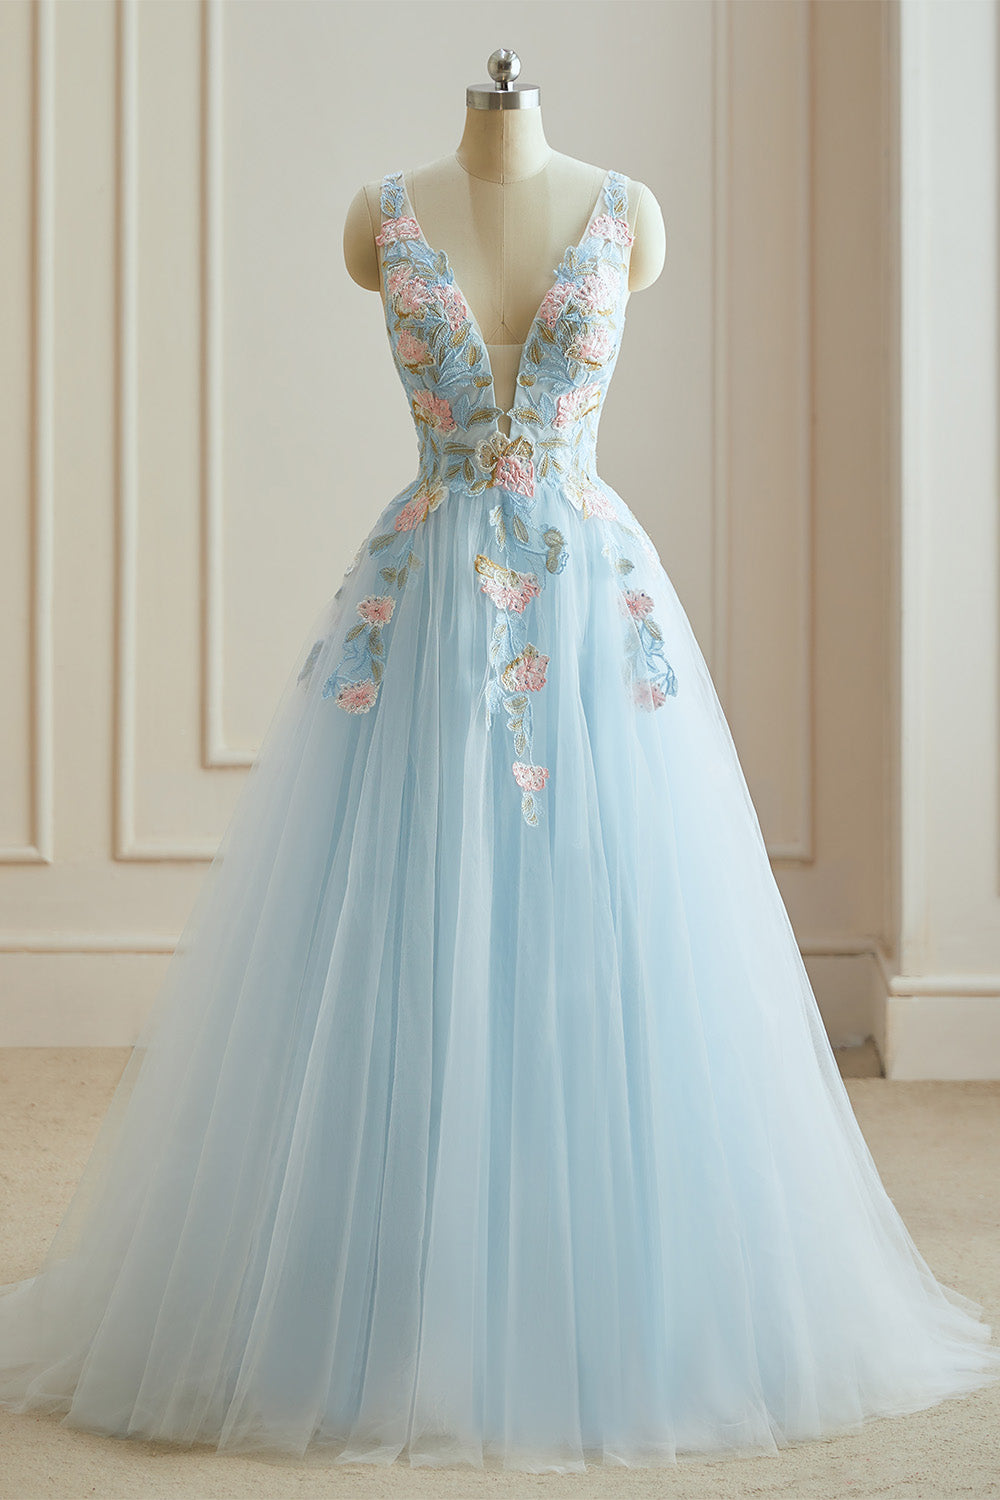 Hebochic A-Line Blue Princess Tulle Long Prom Dress With Appliques